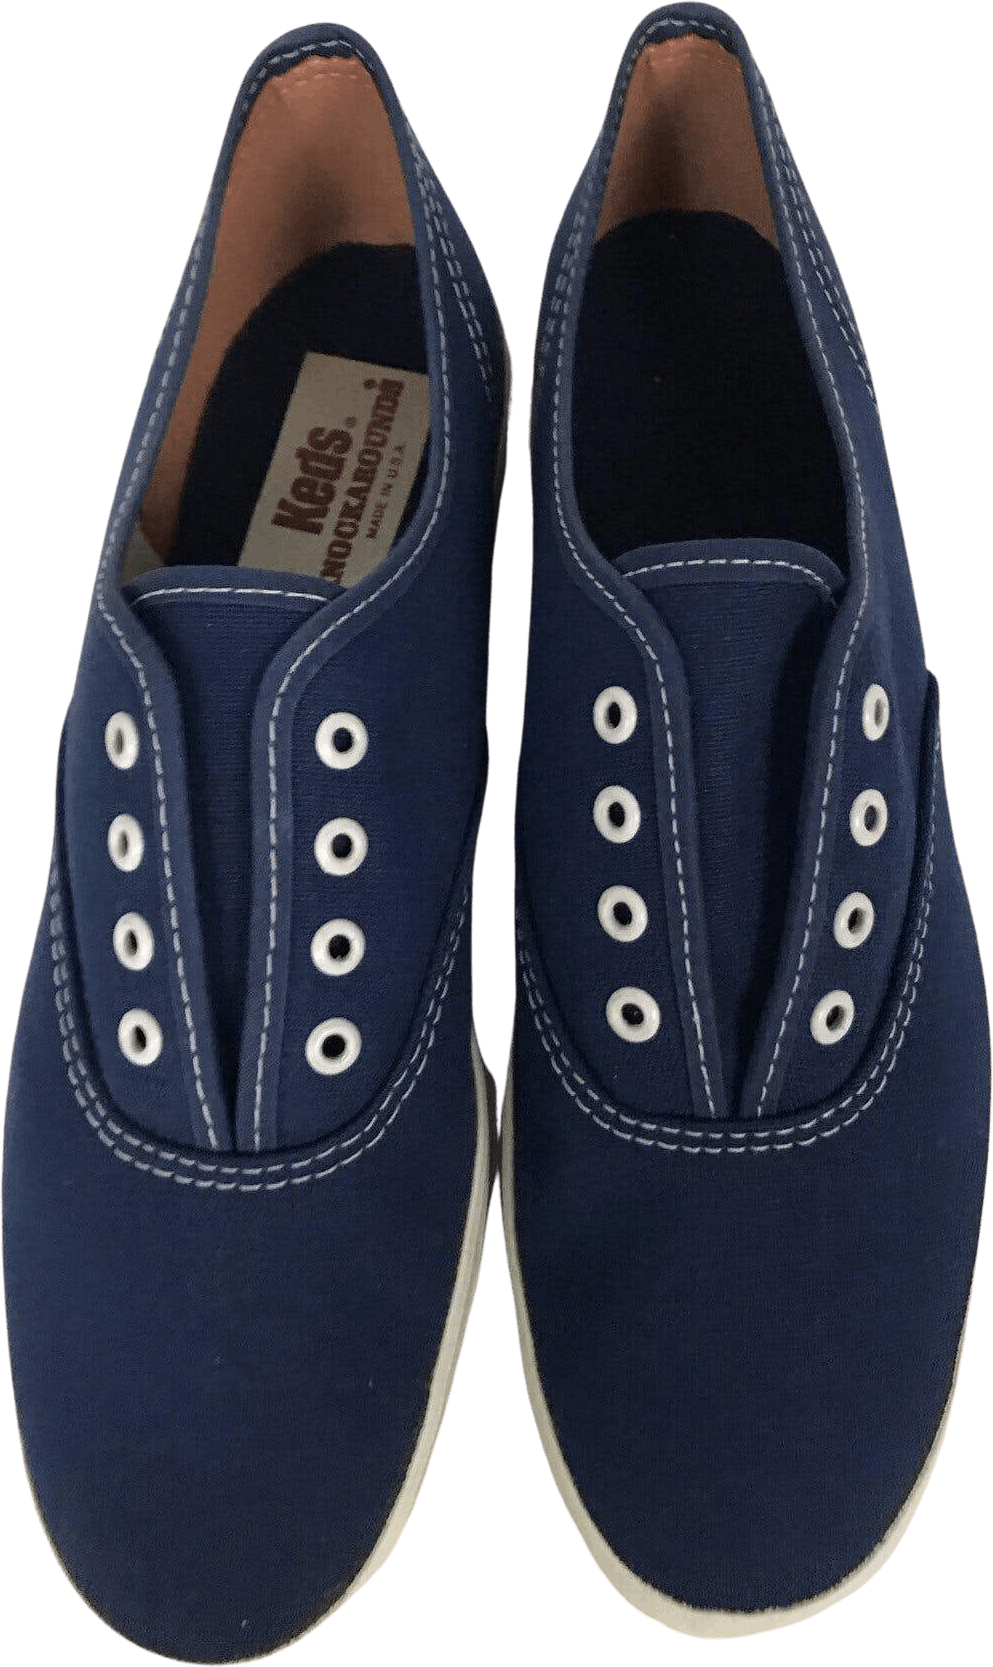 Vintage 80's Navy Blue Canvas Up Tennis Shoes Keds knockabouts | THRILLING